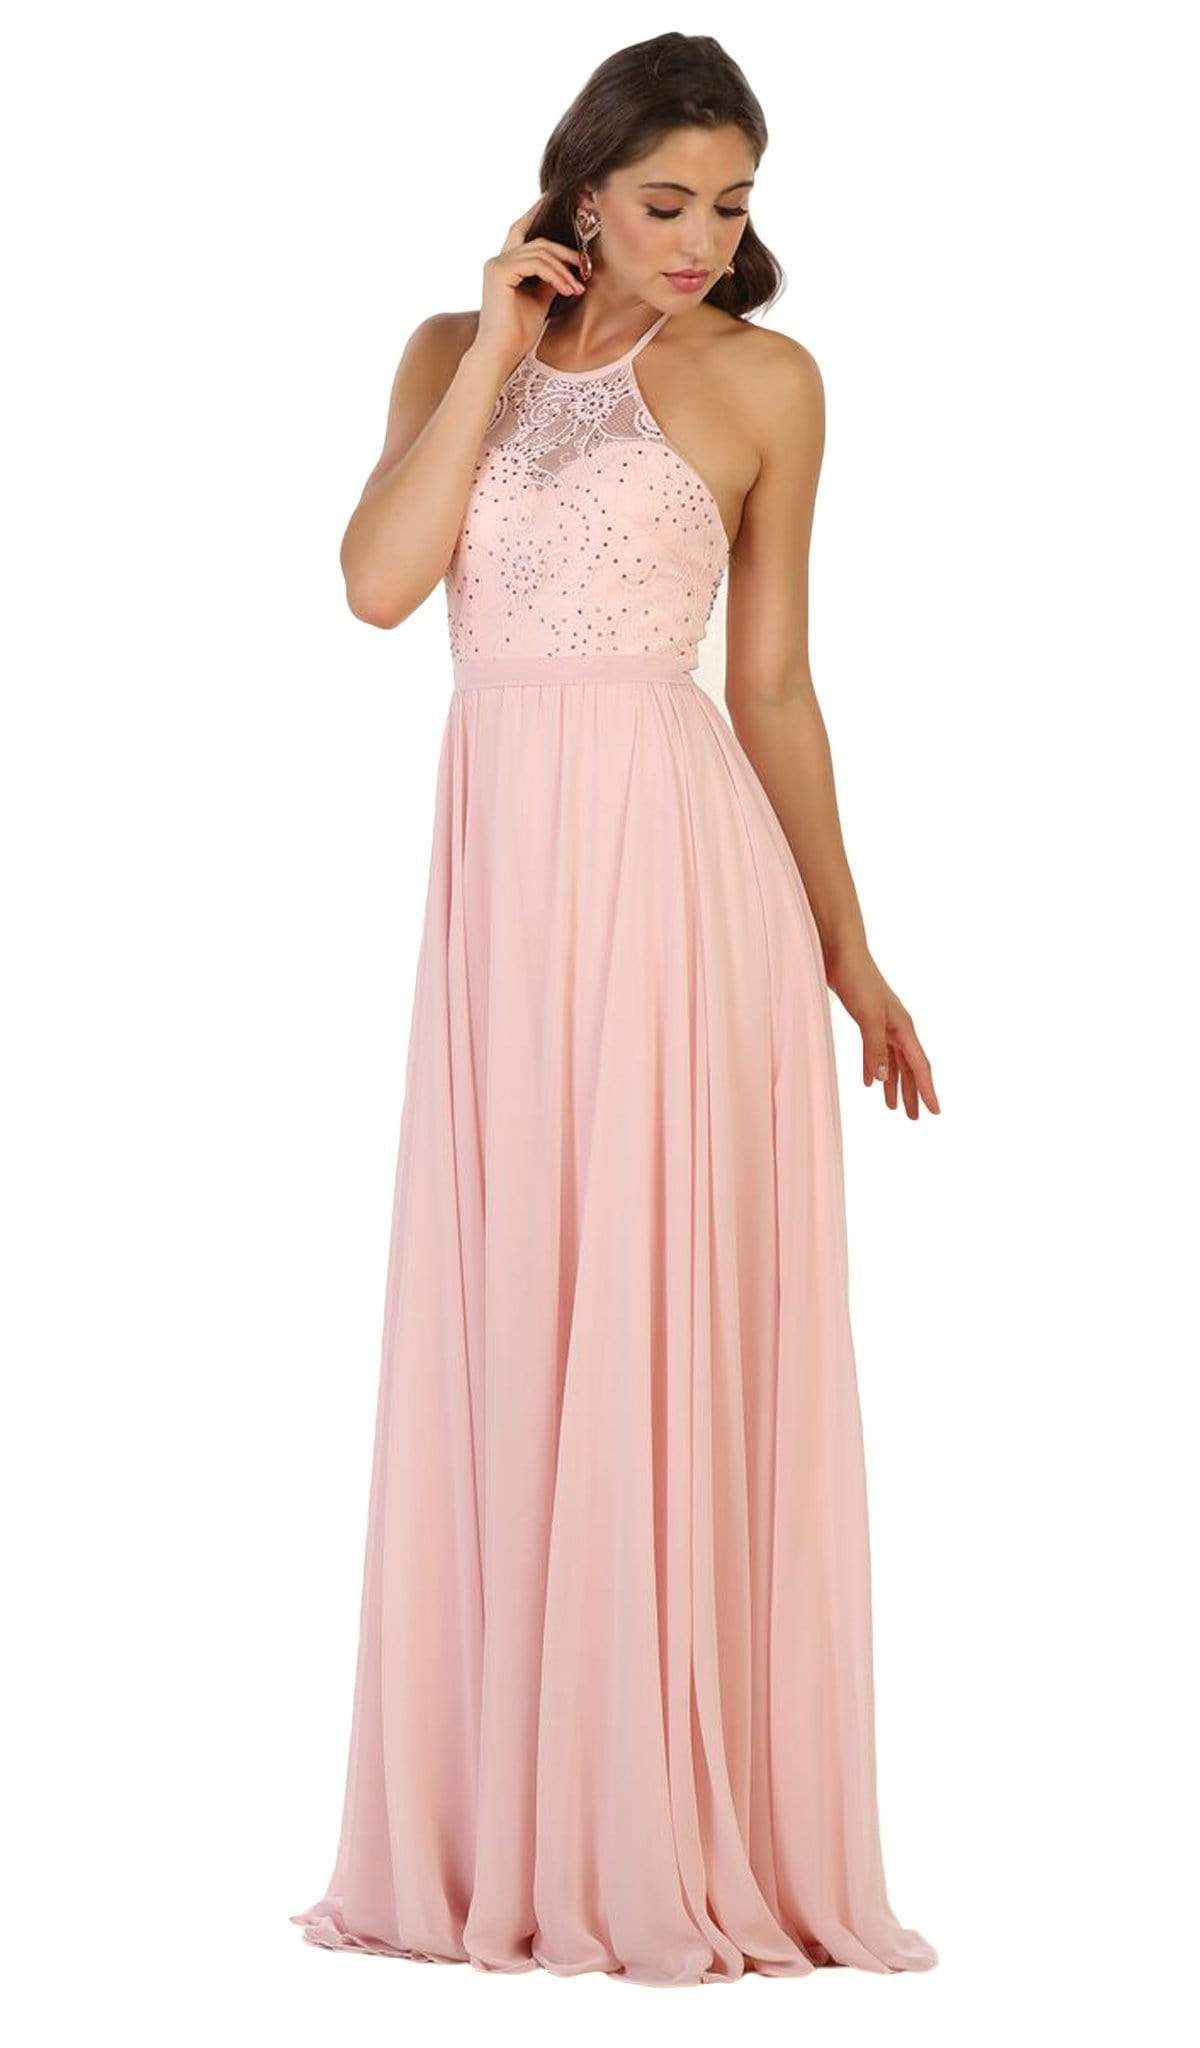 May Queen - Embellished Illusion Halter A-line Evening Dress Bridesmaid Dresses 4 / Blush